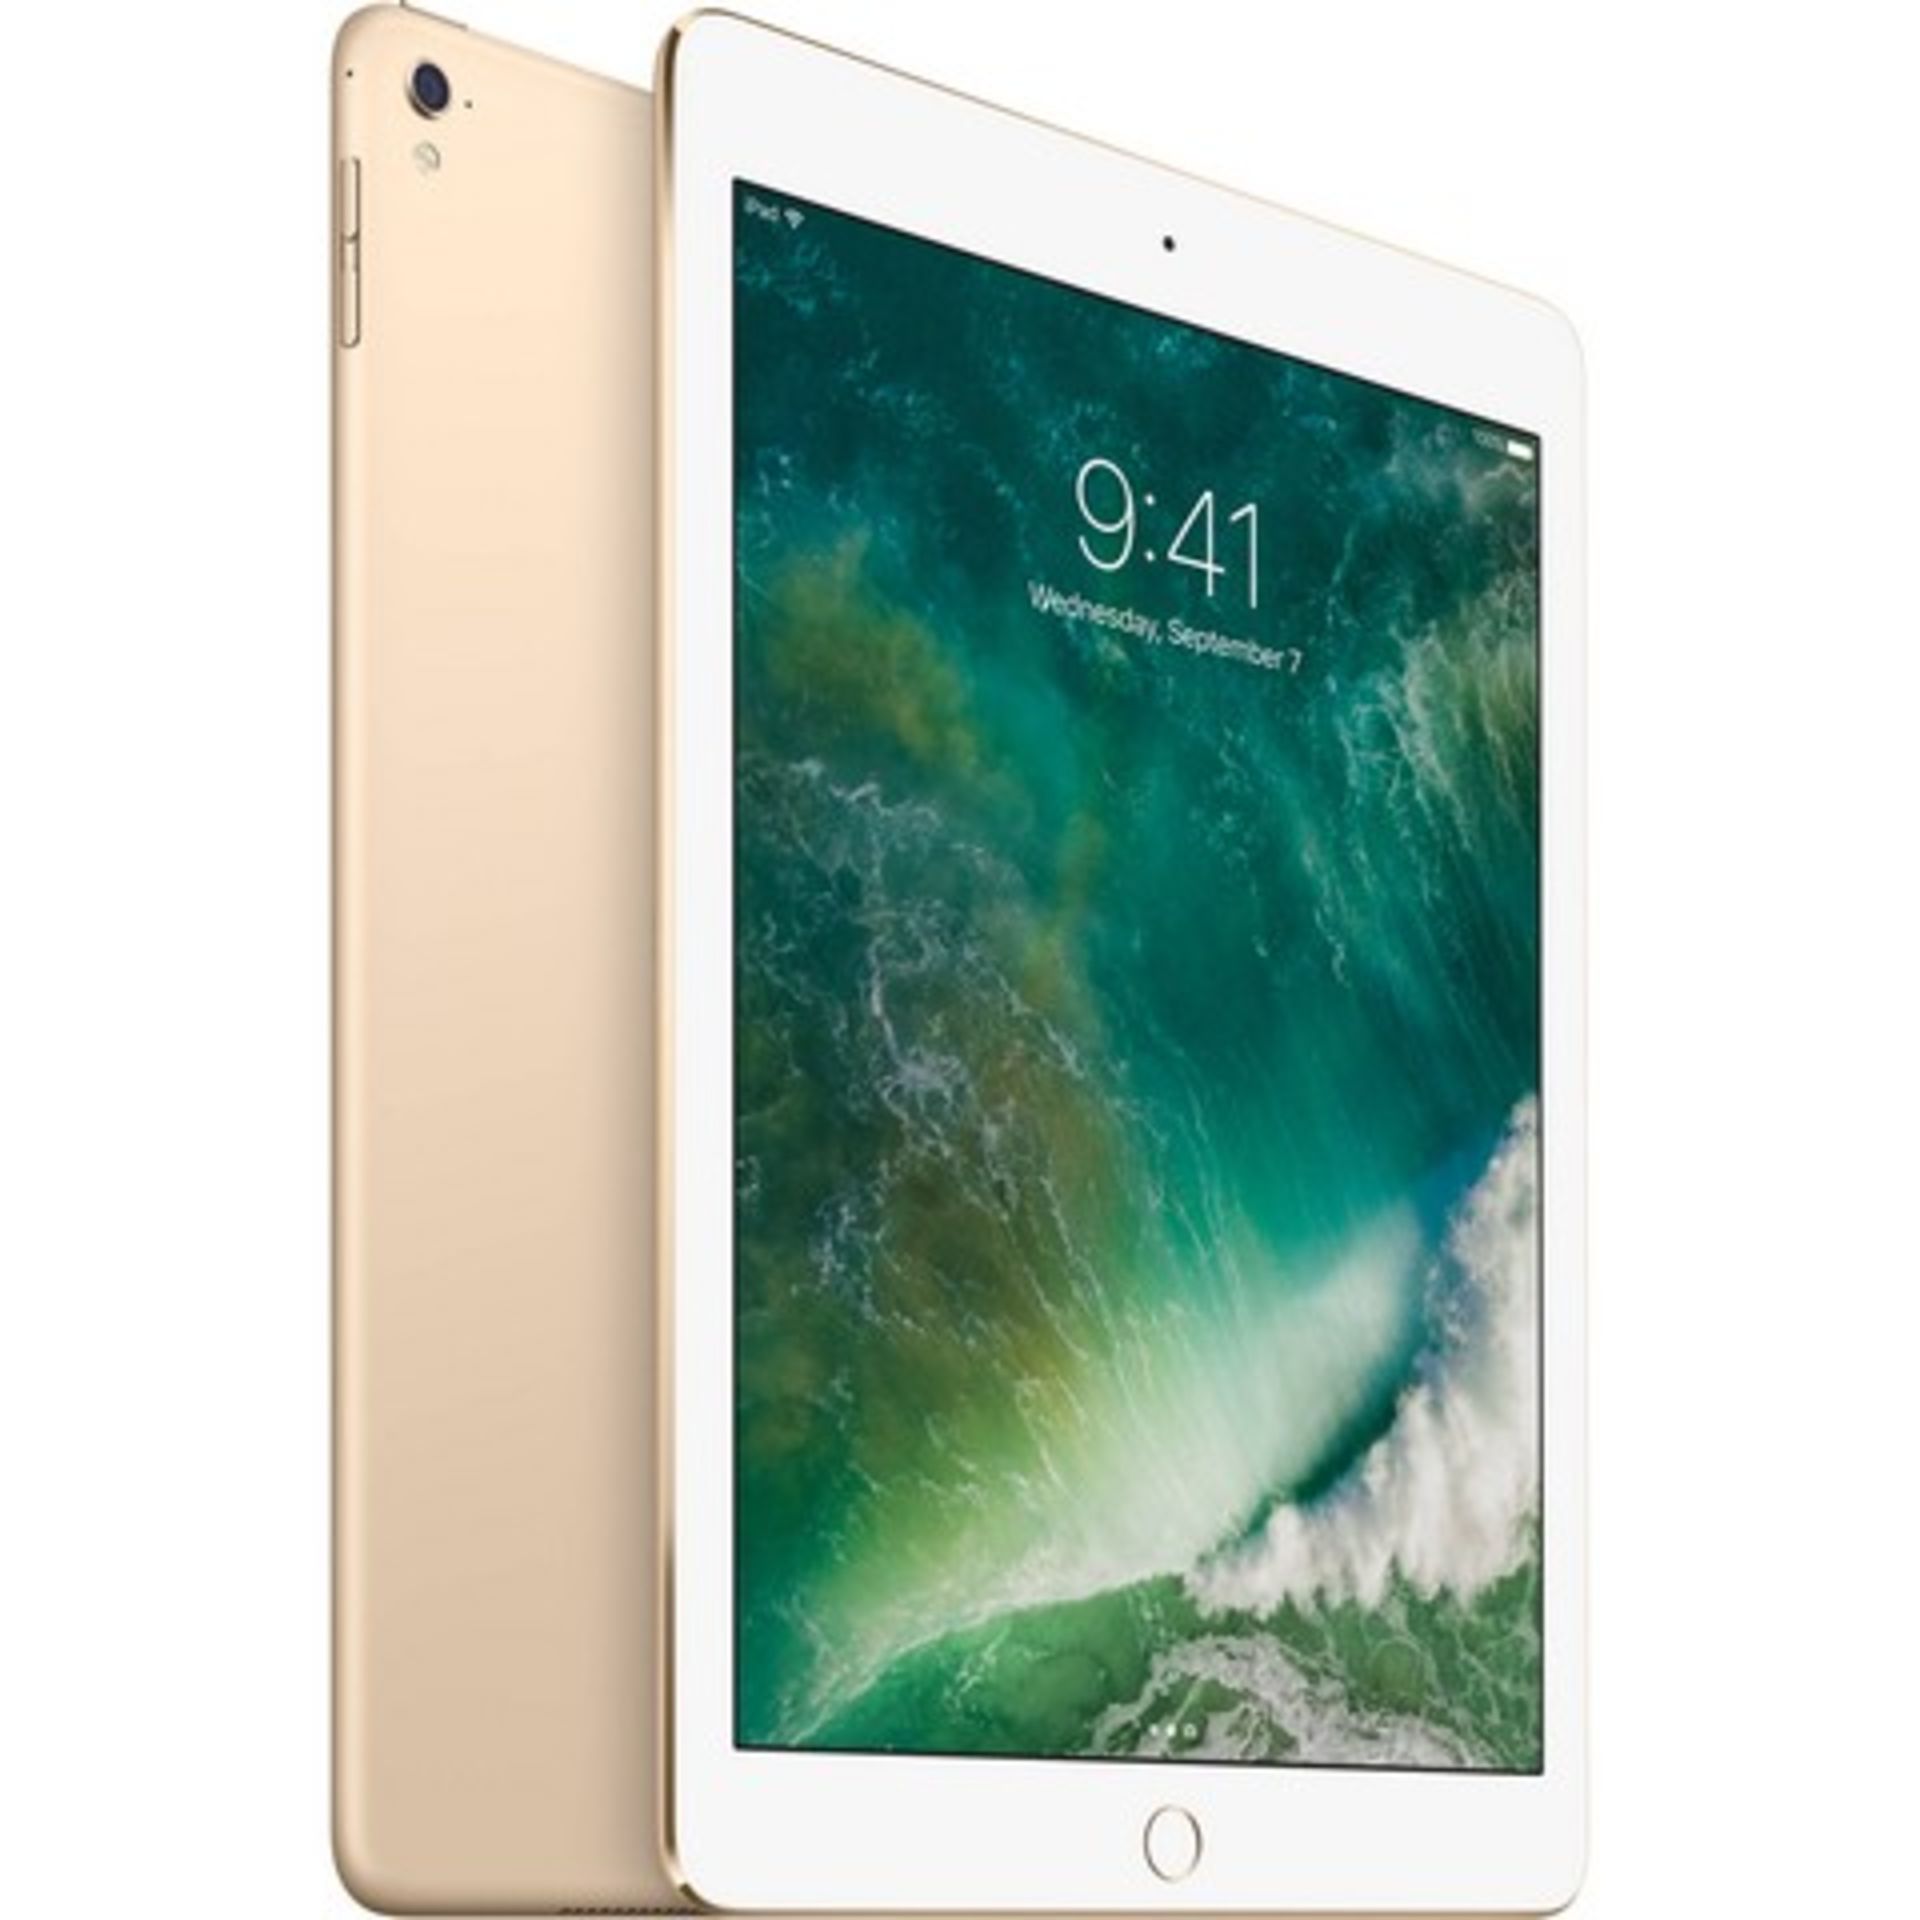 V Grade A Apple iPad Pro 9" Rose Gold 32GB - Wi-Fi Only - with accessories and original box.